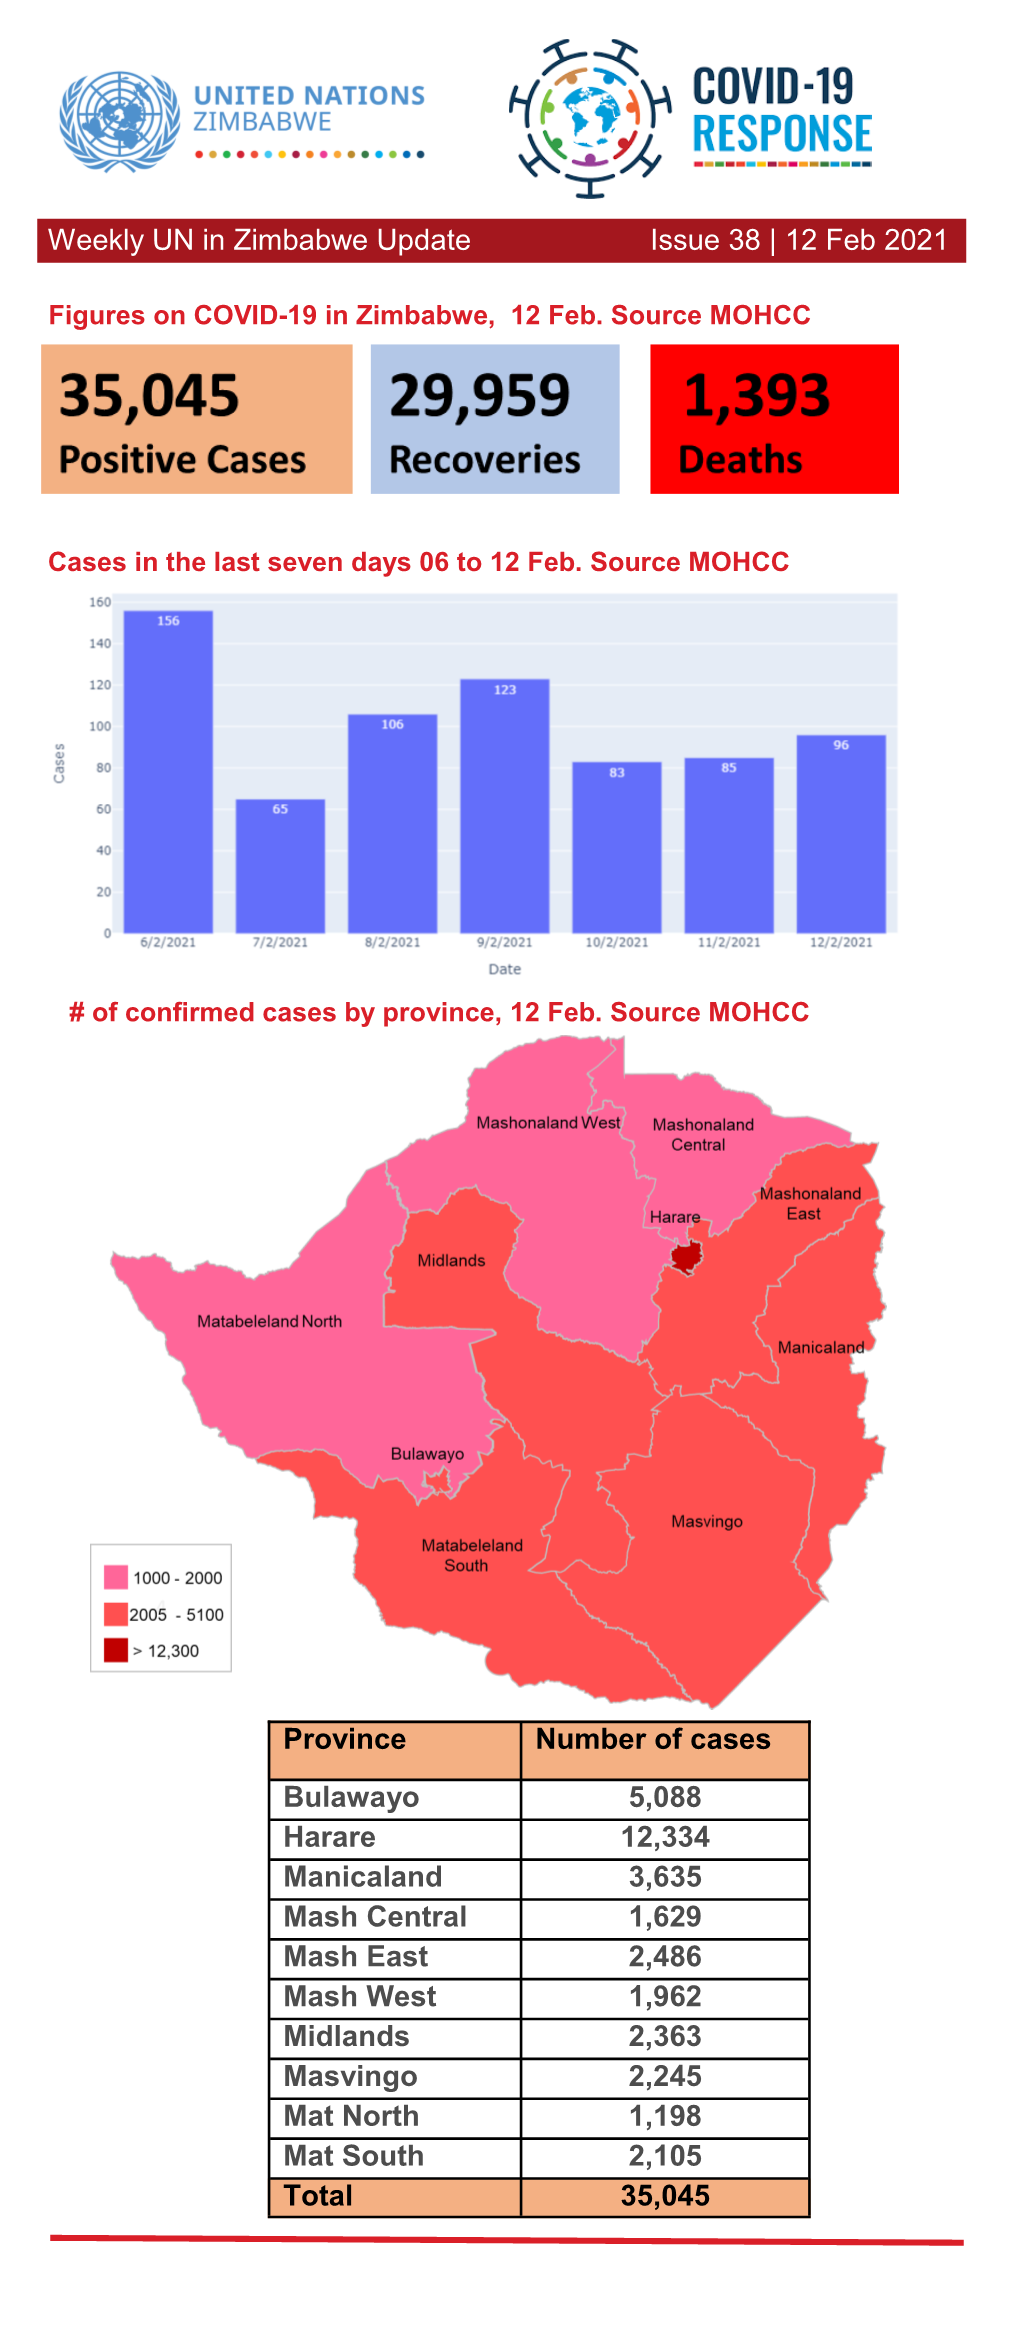 Weekly UN in Zimbabwe Update Issue 38 | 12 Feb 2021 Province Number